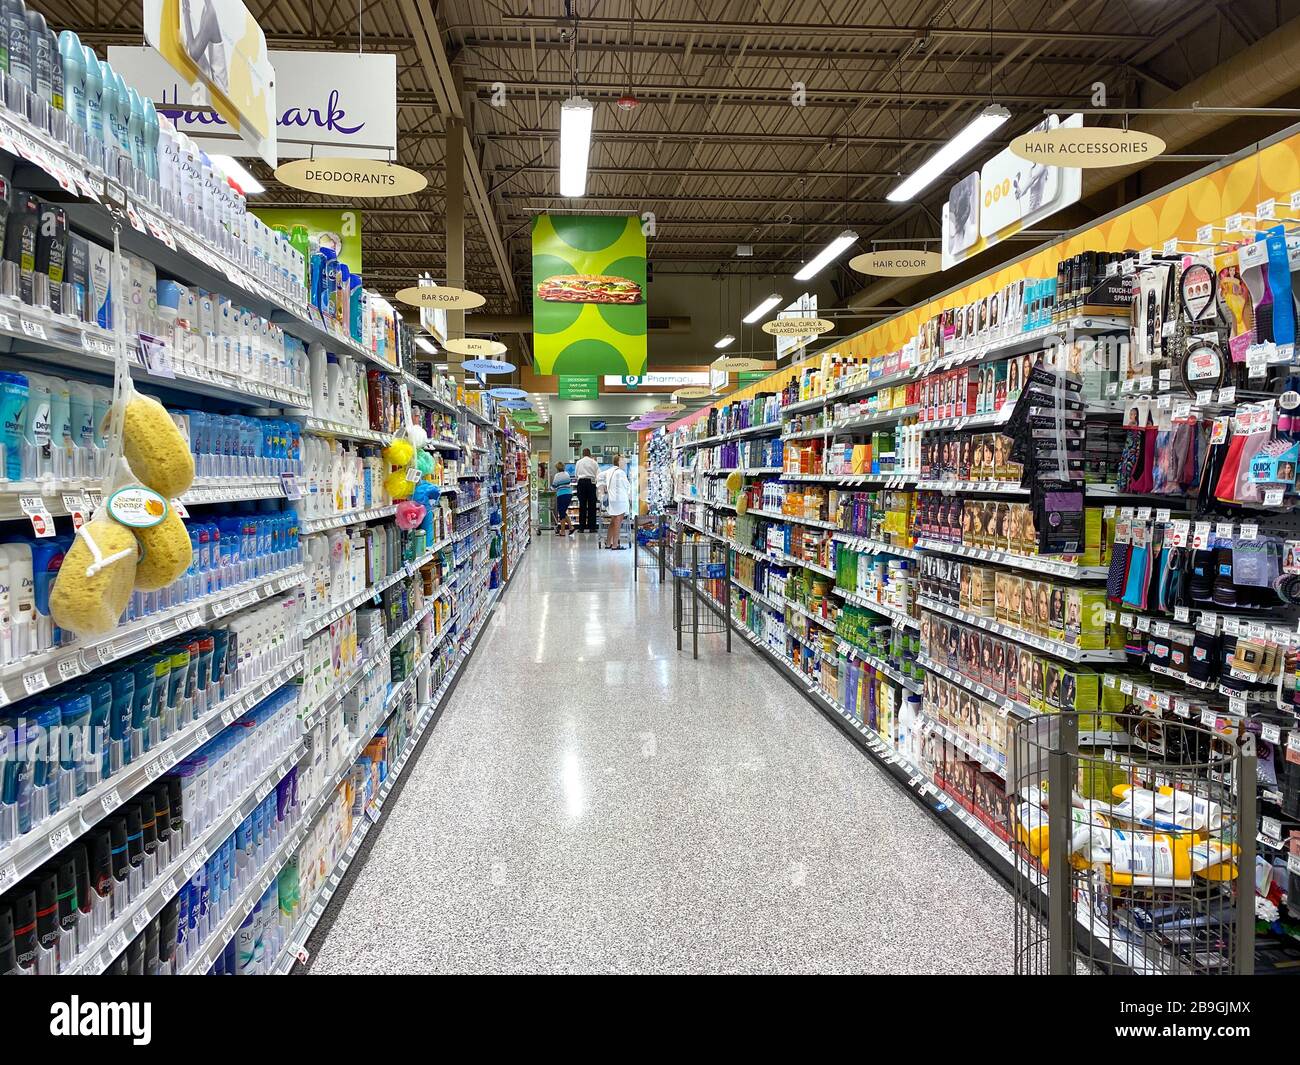 Orlando,FL/USA - 3/4/20: Health and beauty aisle of a Publix grocery store  ready to be purchased by consumers Stock Photo - Alamy